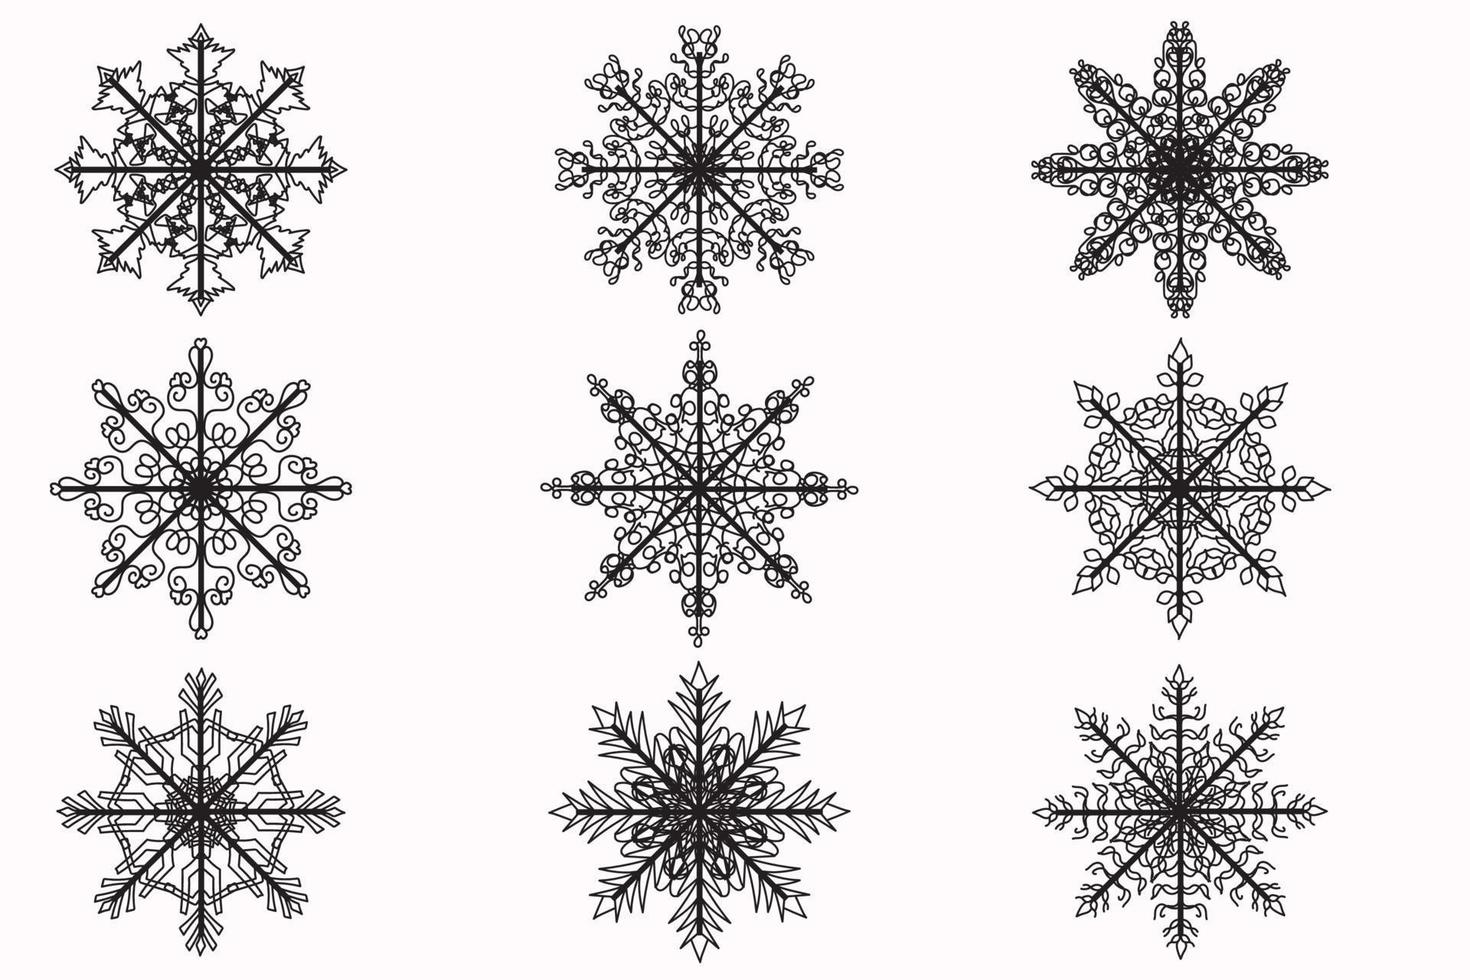 The picture shows various snowflakes painted in black outline, intended for New Year's, postcards, clothing and fabric printing and other occasions vector